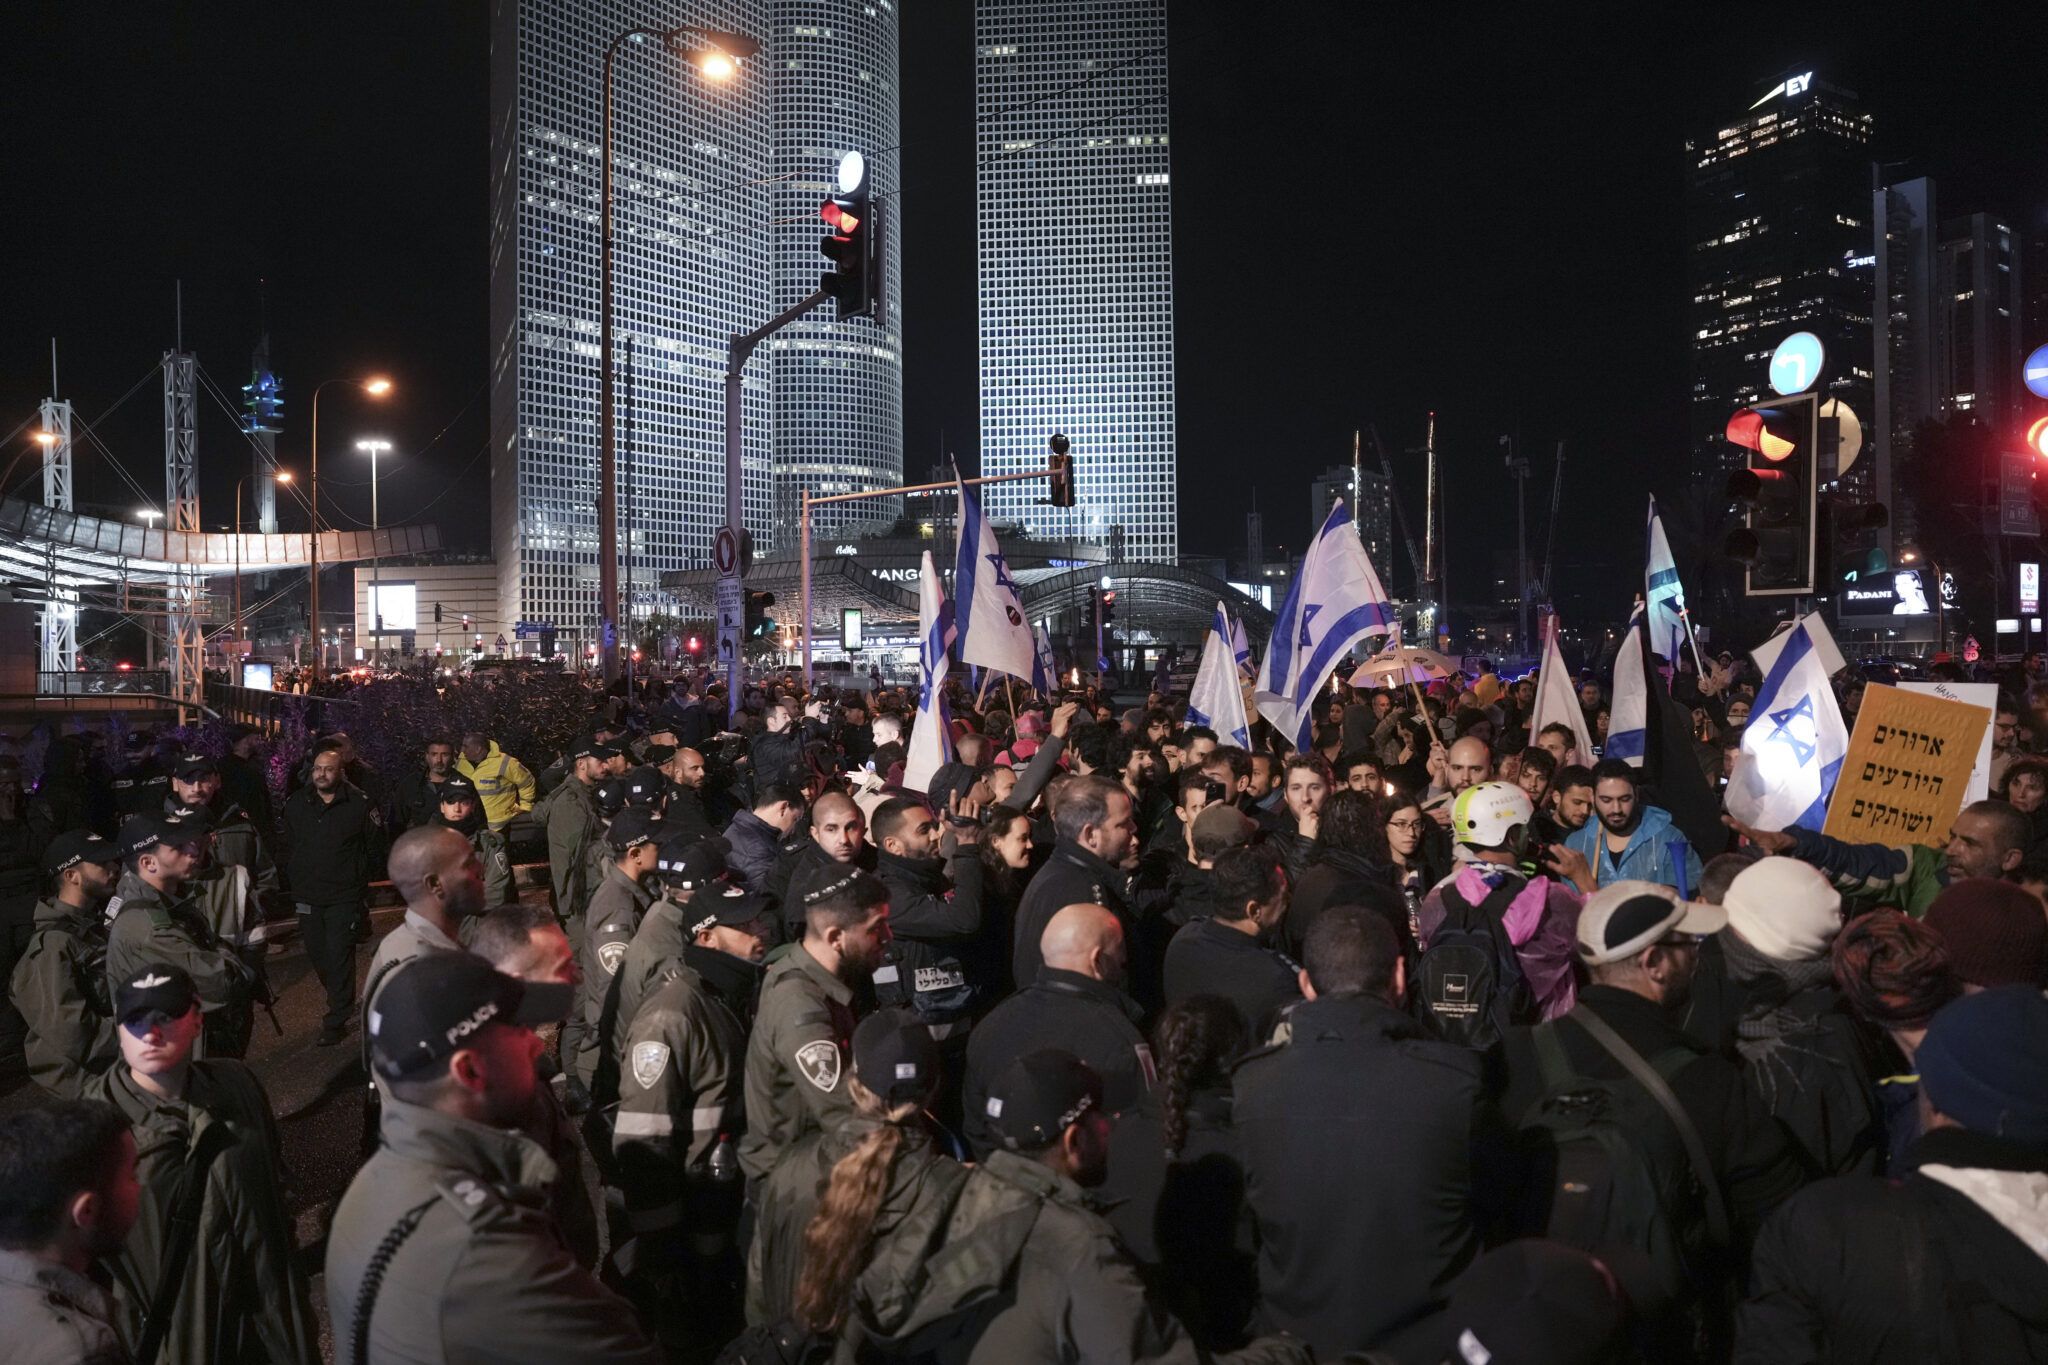 Israeli border police officers prevent protesters from blocking a highway during a rally against the government's plans to overhaul the country's legal system, in Tel Aviv, Israel, Saturday, Jan. 14, 2023. Tens of thousands of Israelis have gathered in central Tel Aviv to protest plans by Prime Minister Benjamin Netanyahu's new government to overhaul the country's legal system and weaken the Supreme Court. (AP Photo/Oded Balilty)